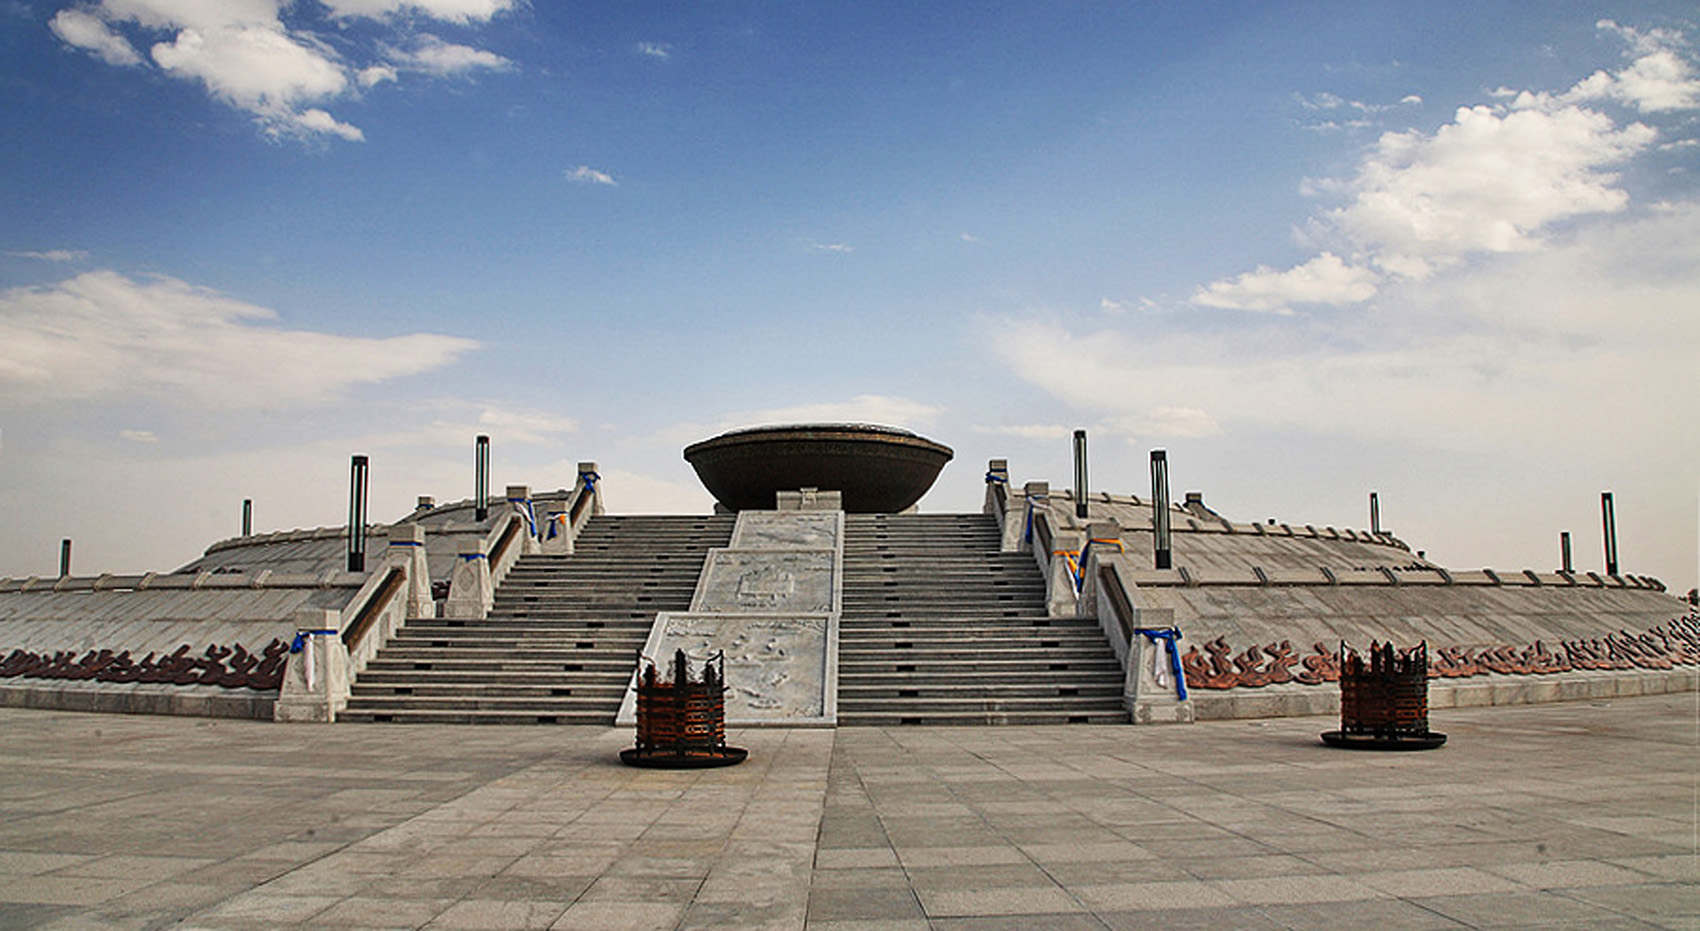 012-holy-fire-park-of-aolezhaoqi-town-inner-mongolia-by-beijing-urban-landscape-research-institute.jpg